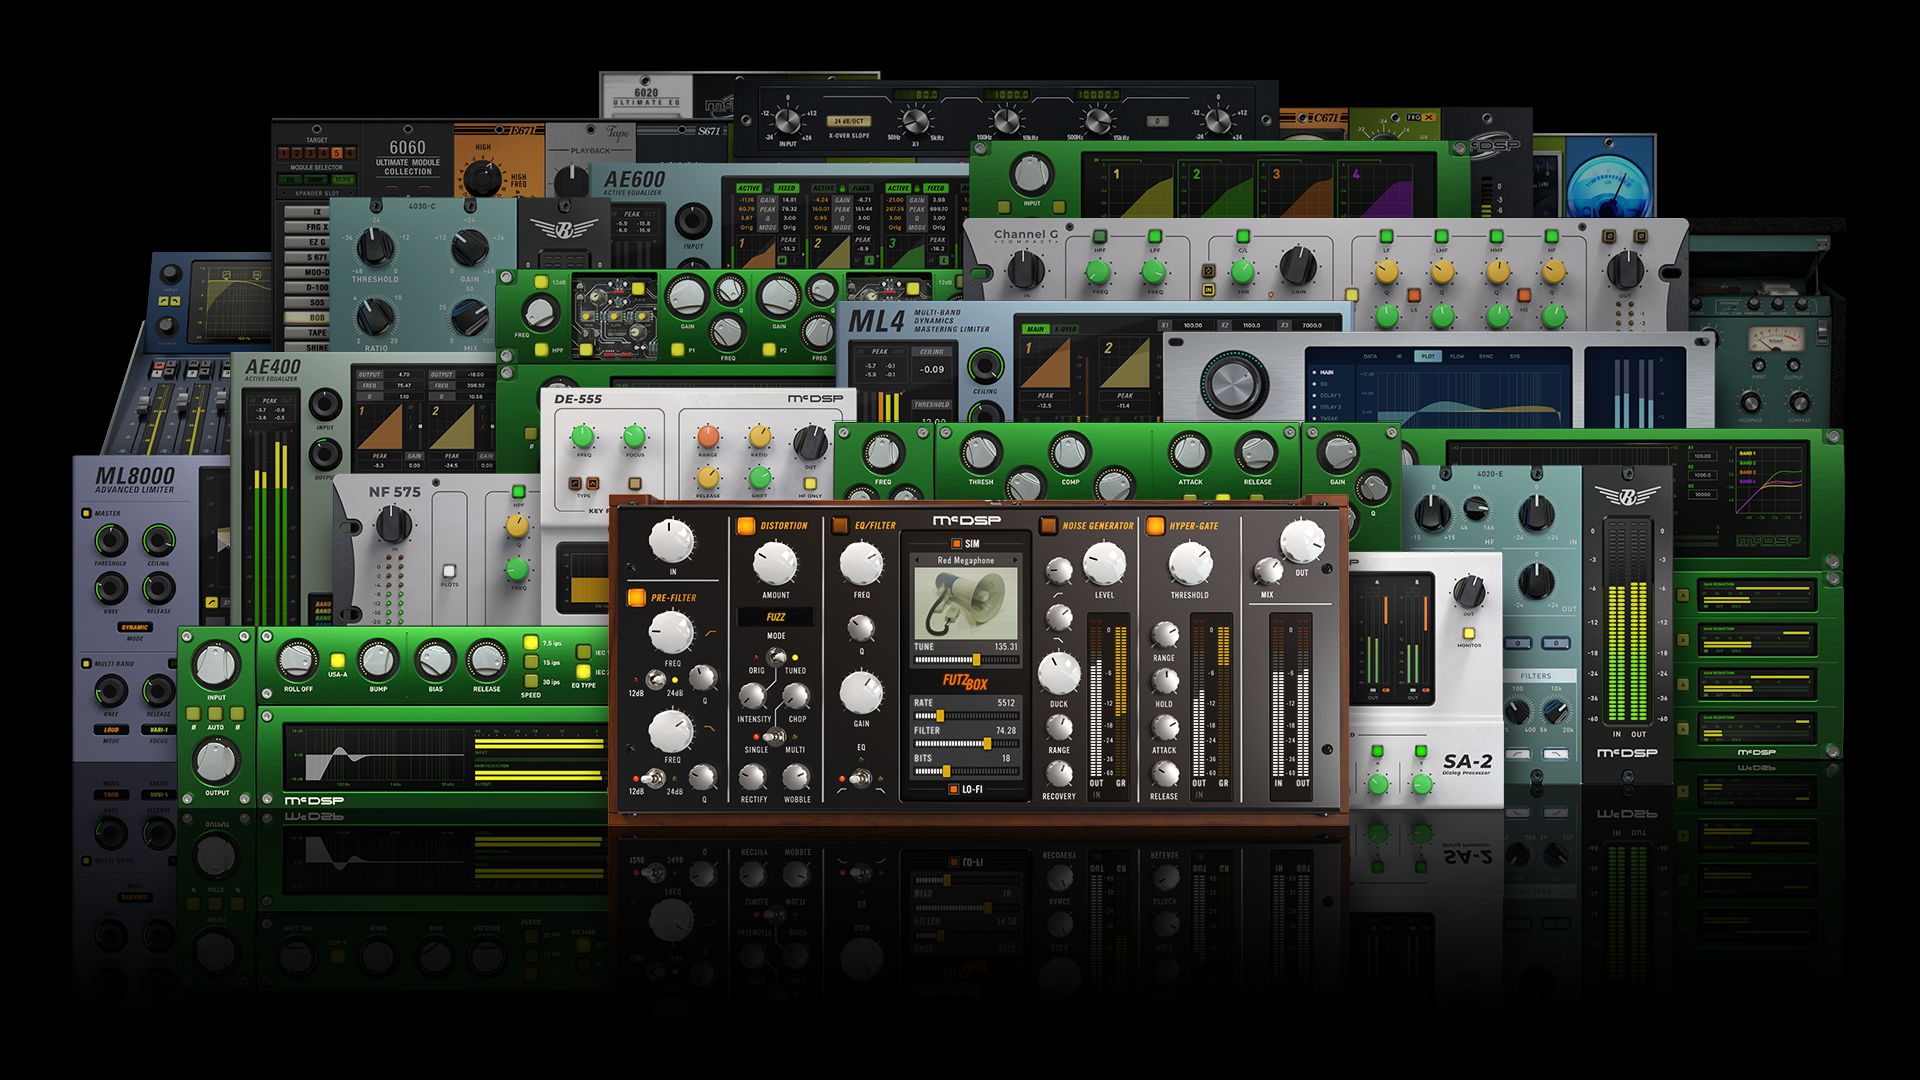 McDSP Everything Pack HD v6 to Everything Pack HD v7.1